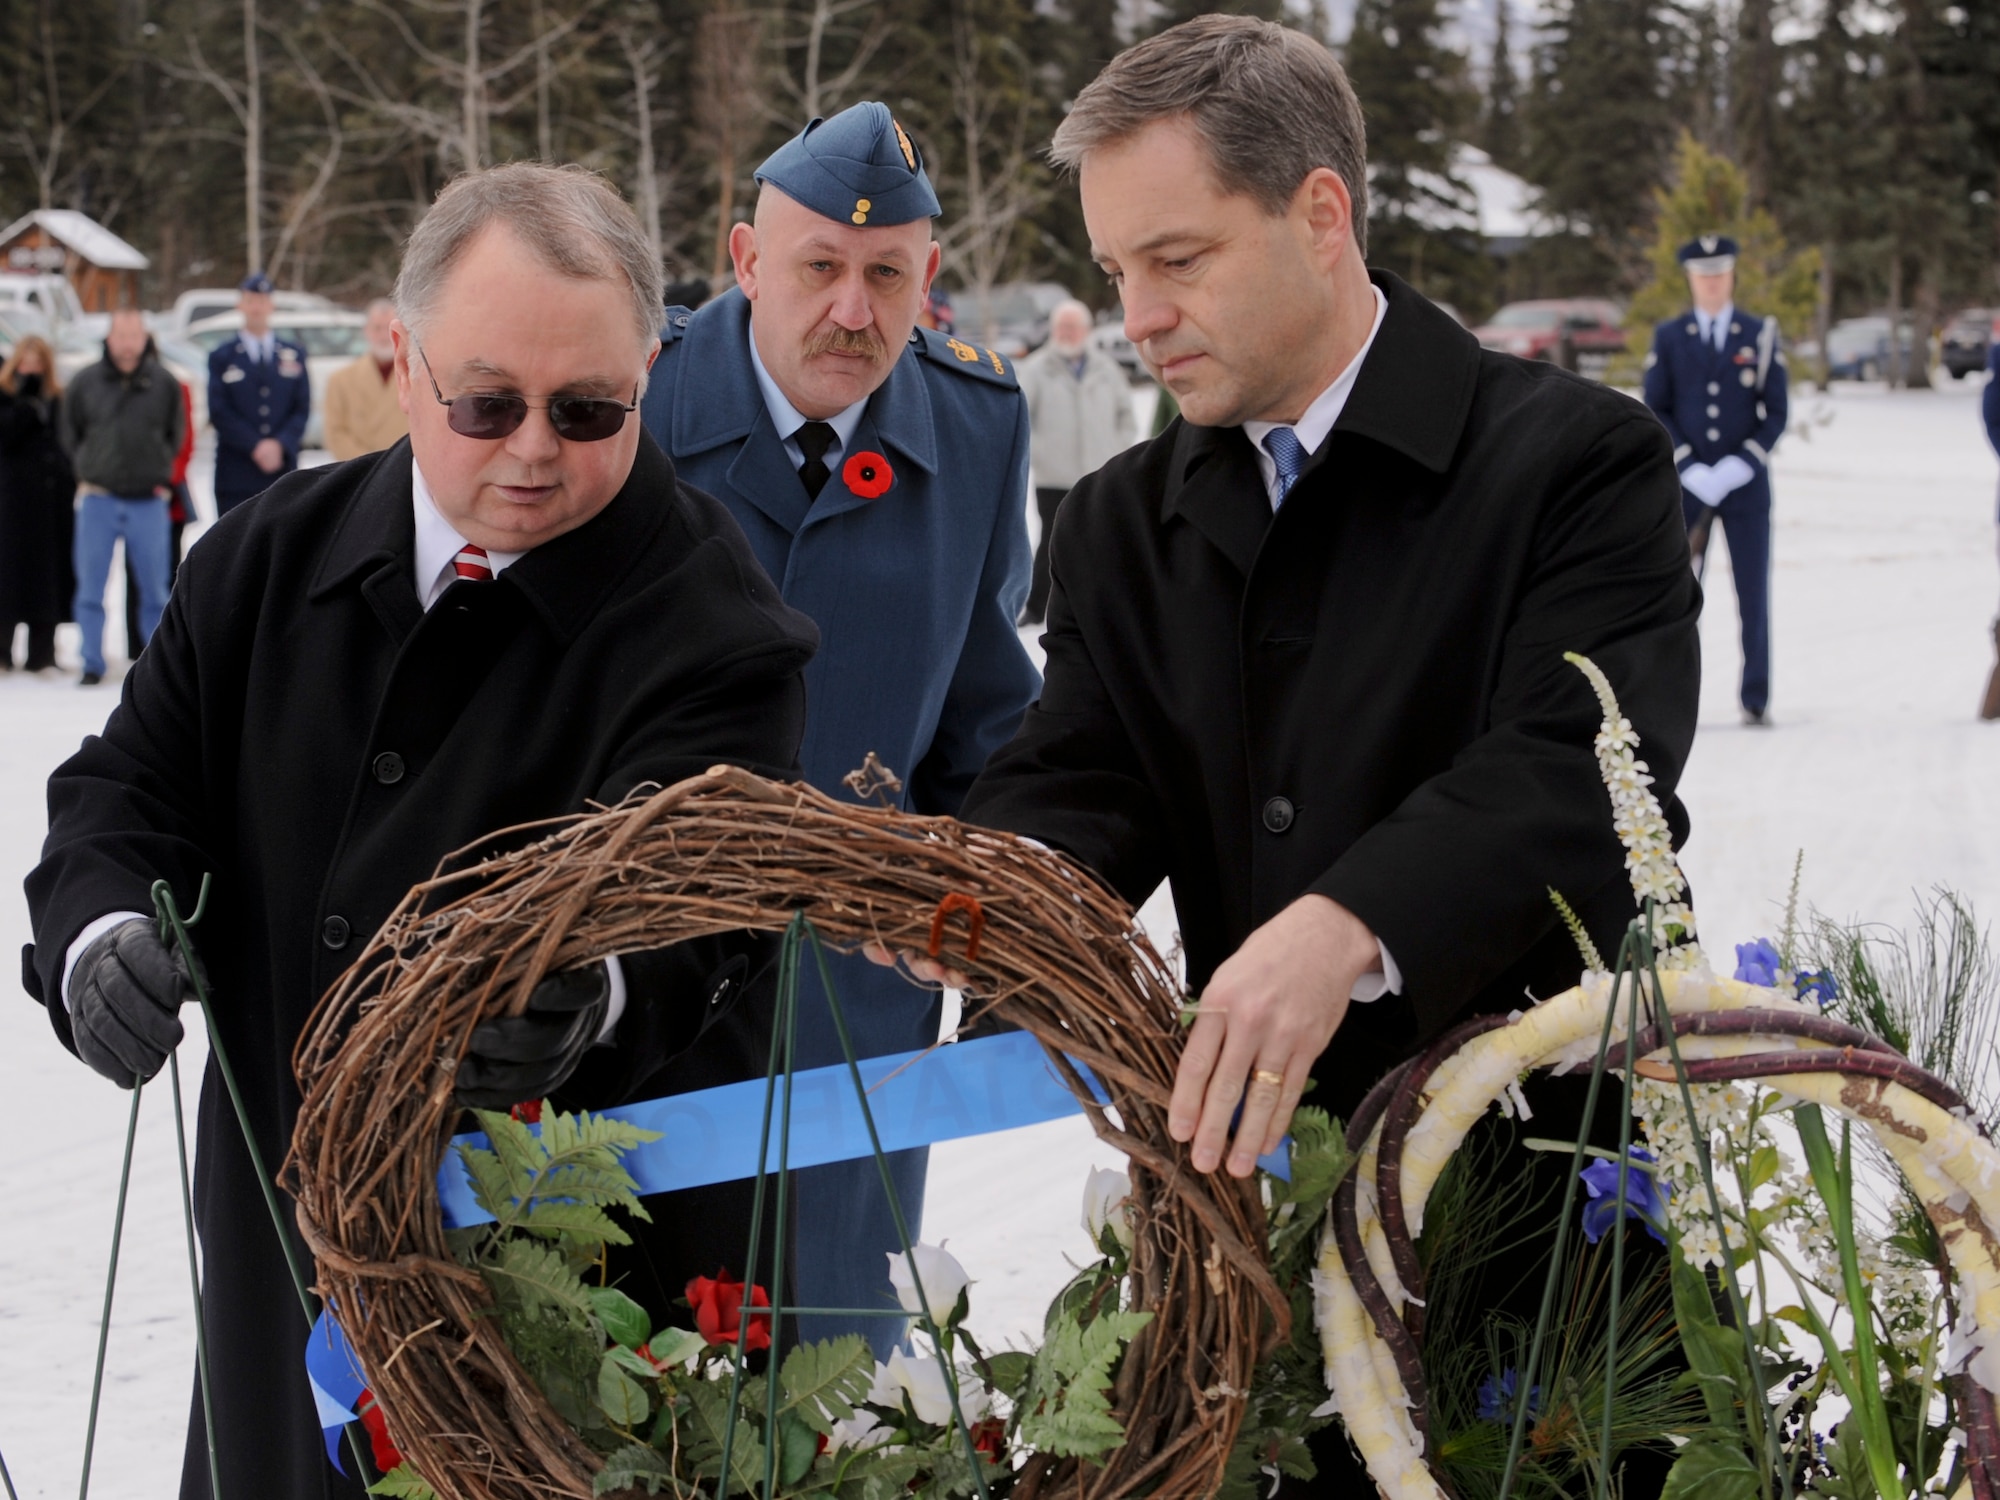 FORT RICHARDSON, Alaska -- Jay Pullins (left) and Lt. Governor Sean Parnell (right) hang a wreath during the Veterans Day ceremony at Fort Richardson National Cemetery Nov. 11. The ceremony commemorated all those who paid the ultimate sacrifice for their country. Air Force alongside Army and Canadian forces were present for the ceremony. (U.S. Air Force photo/Staff Sgt. Joshua Garcia)